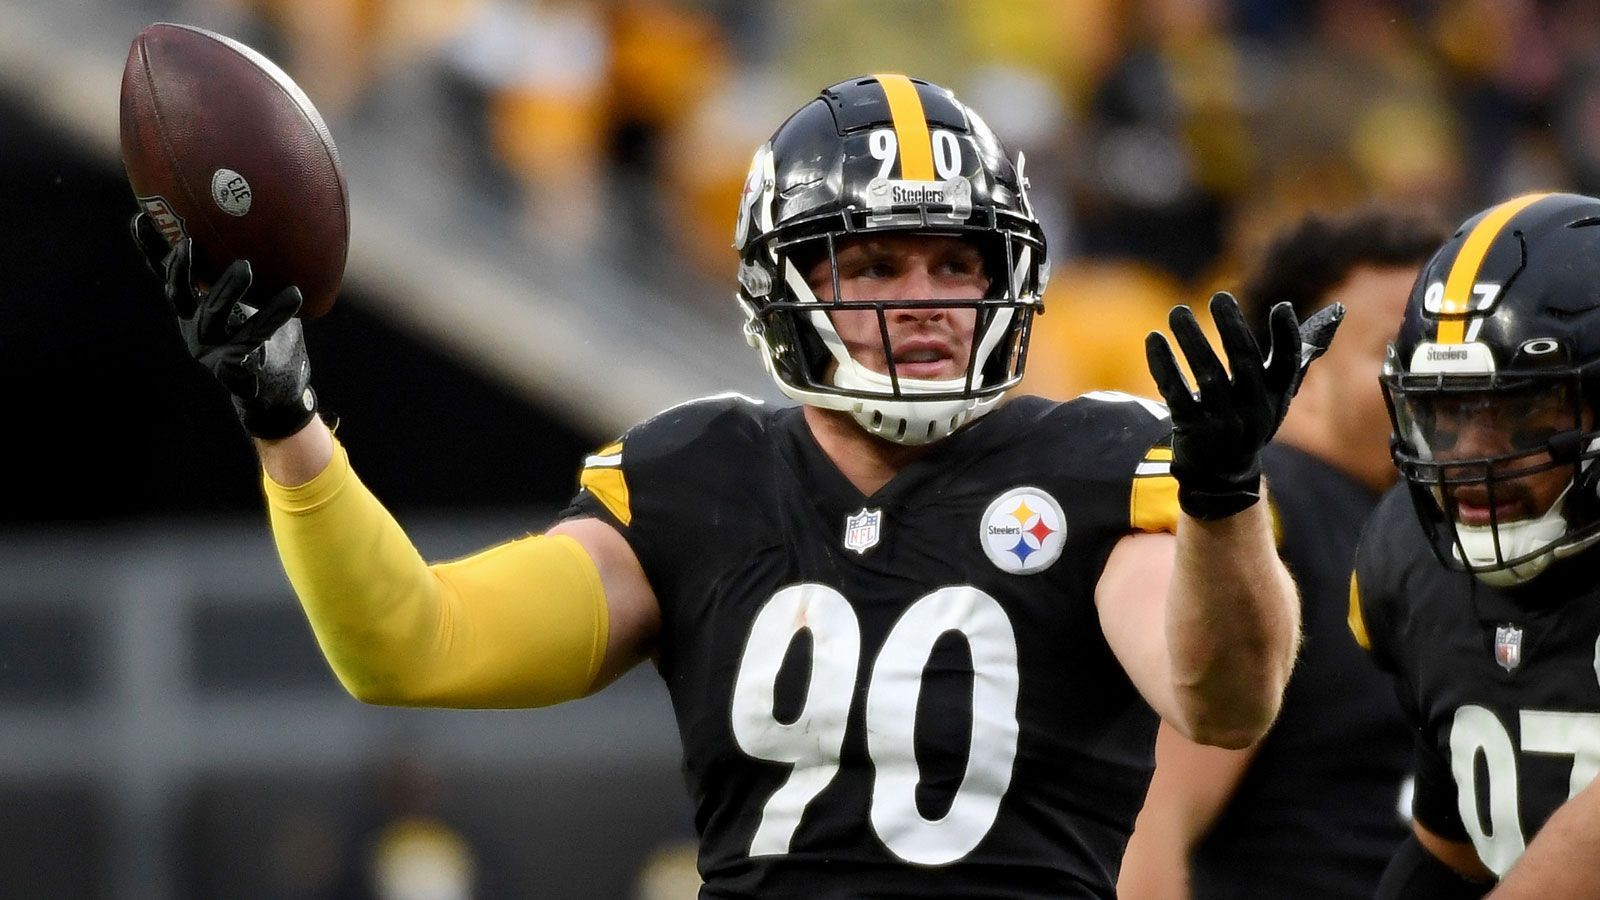 
                <strong>Platz 10: T.J. Watt (Pittsburgh Steelers)</strong><br>
                &#x2022; Position: Outside Linebacker<br>&#x2022; In der NFL seit: 2017 (30. Pick)<br>&#x2022; Größte Erfolge: Defensive Player of the Year 2021, 3x First-Team All-Pro, 4x Pro Bowl<br>
              